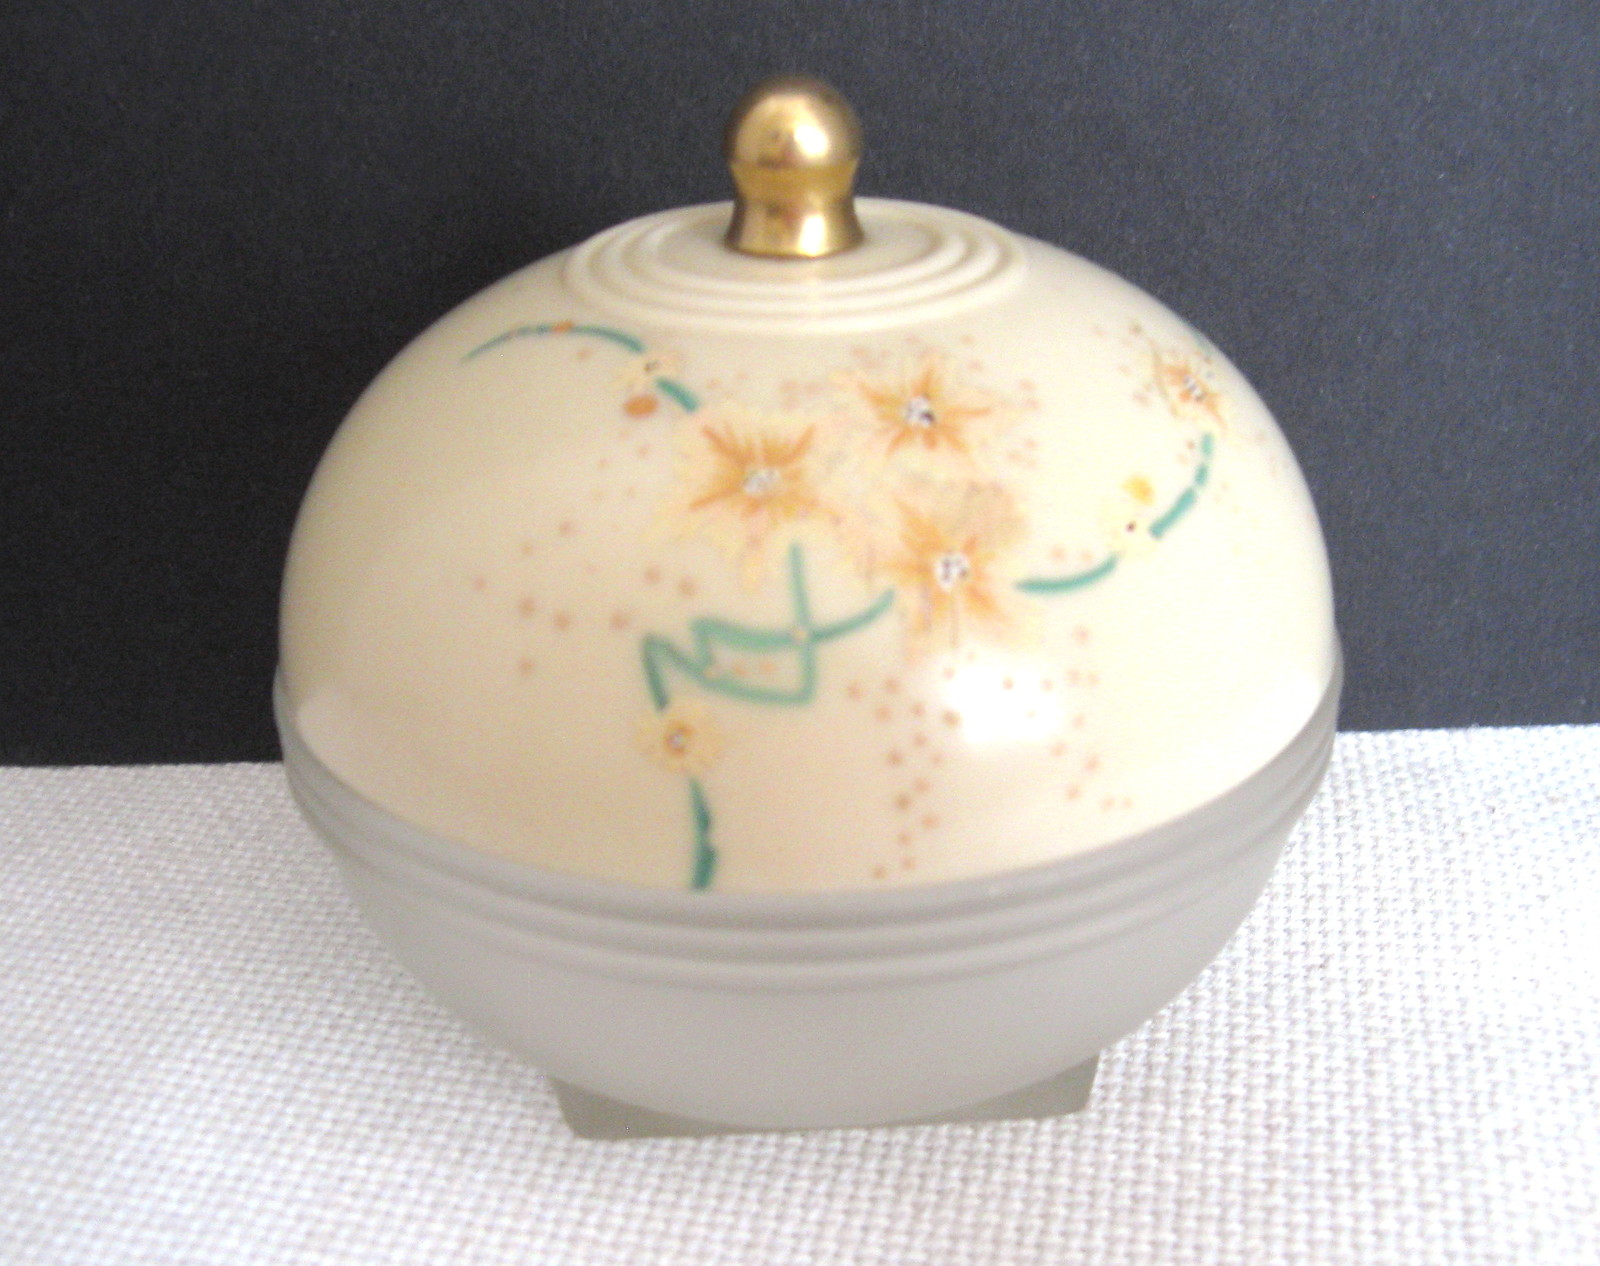 Vintage DeVilbiss Frosted Glass Powder Box, Vintage DeVilbiss Glass Dresser Box - $24.00